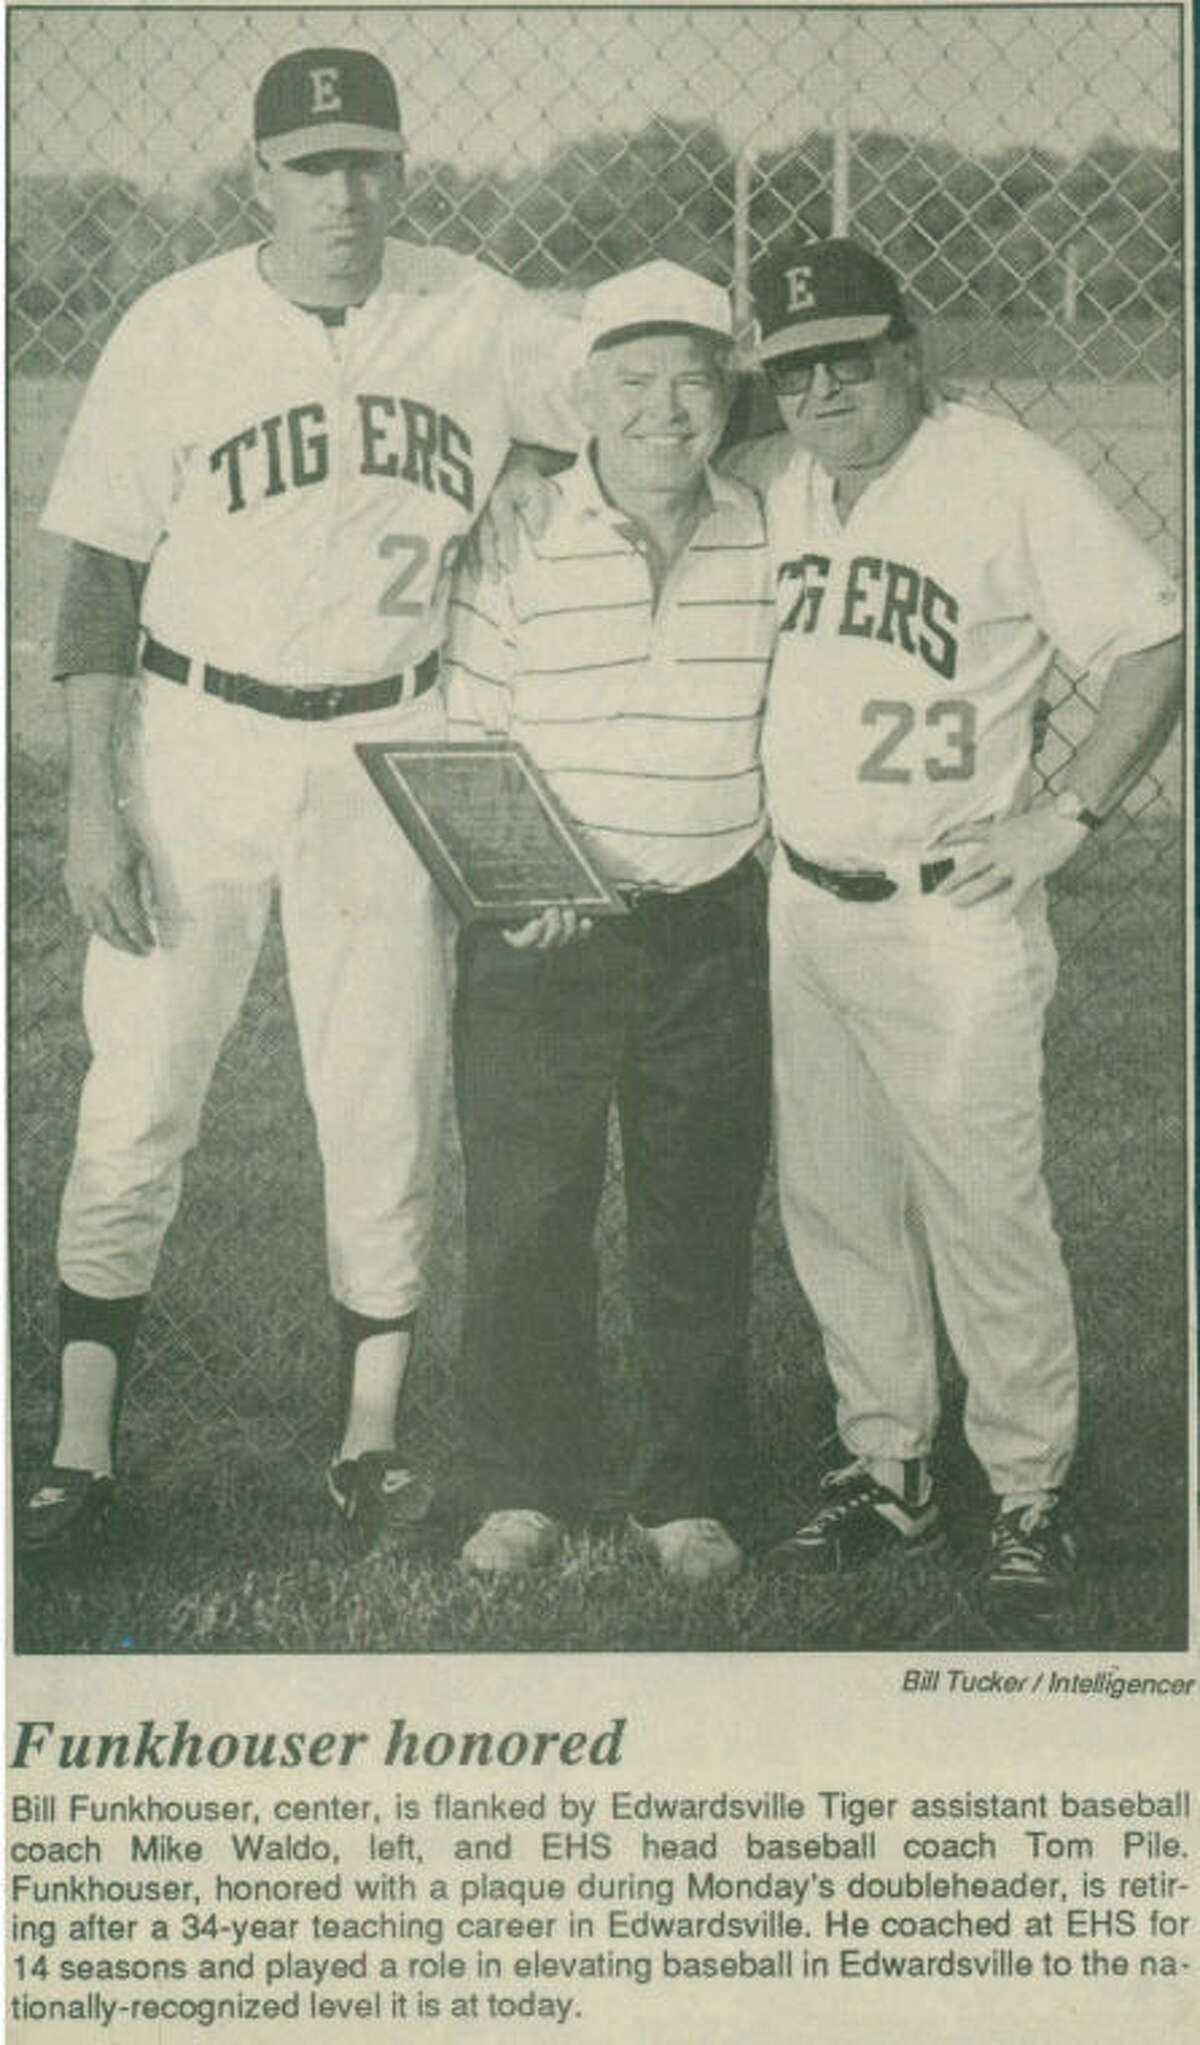 Pictured from left to right are: Mike Waldo, Bill Funkhouser and Tom Pile. This Intelligencer file photo shows Waldo and Pile posing with Funkhouser and a plaque honoring his 24-year teaching career and 14-year career as the head baseball coach at Edwardsville. Funkhouser gave Waldo his break as a volunteer coach at EHS and Waldo found true success coaching alongside Pile on his way to being a part of his 1,000th win with the baseball program  during the recent 2014 season.